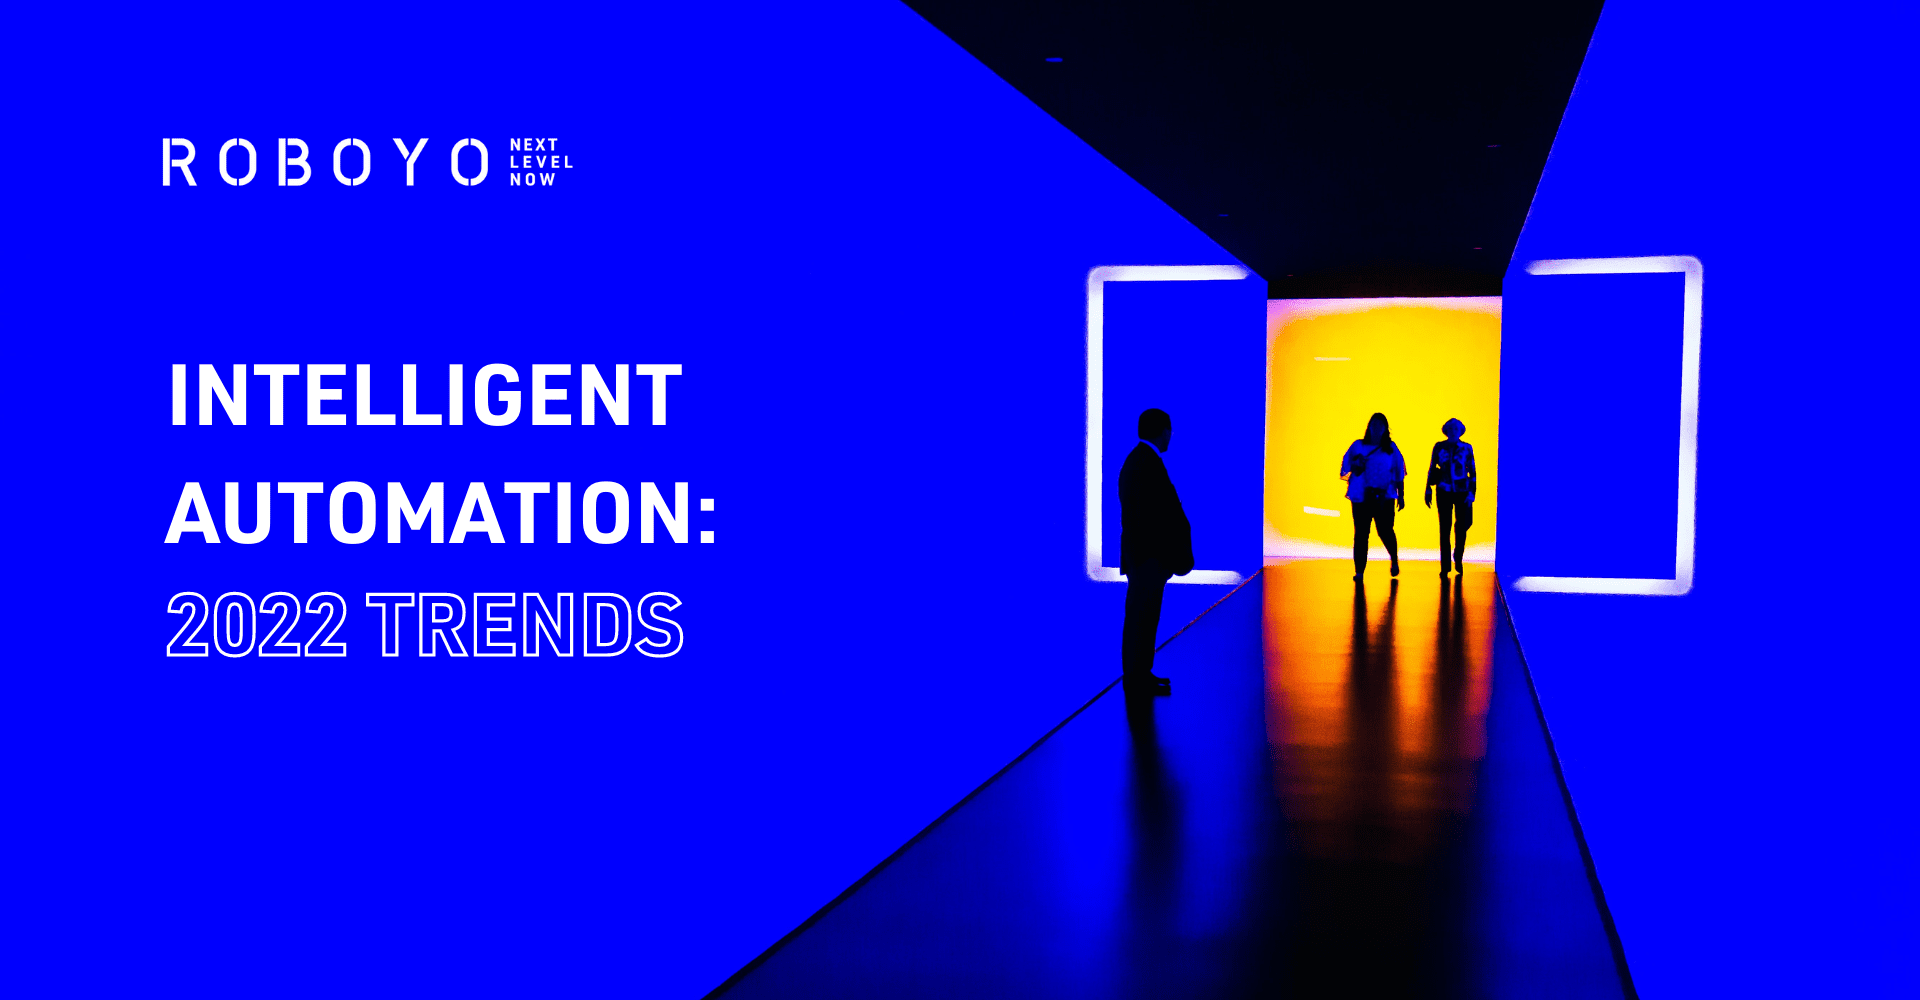 3 silhouettes of people in a blue lit corridor with white roboyo logo in top left corner and Intelligent Automation Trends 2022 underneath - also in white